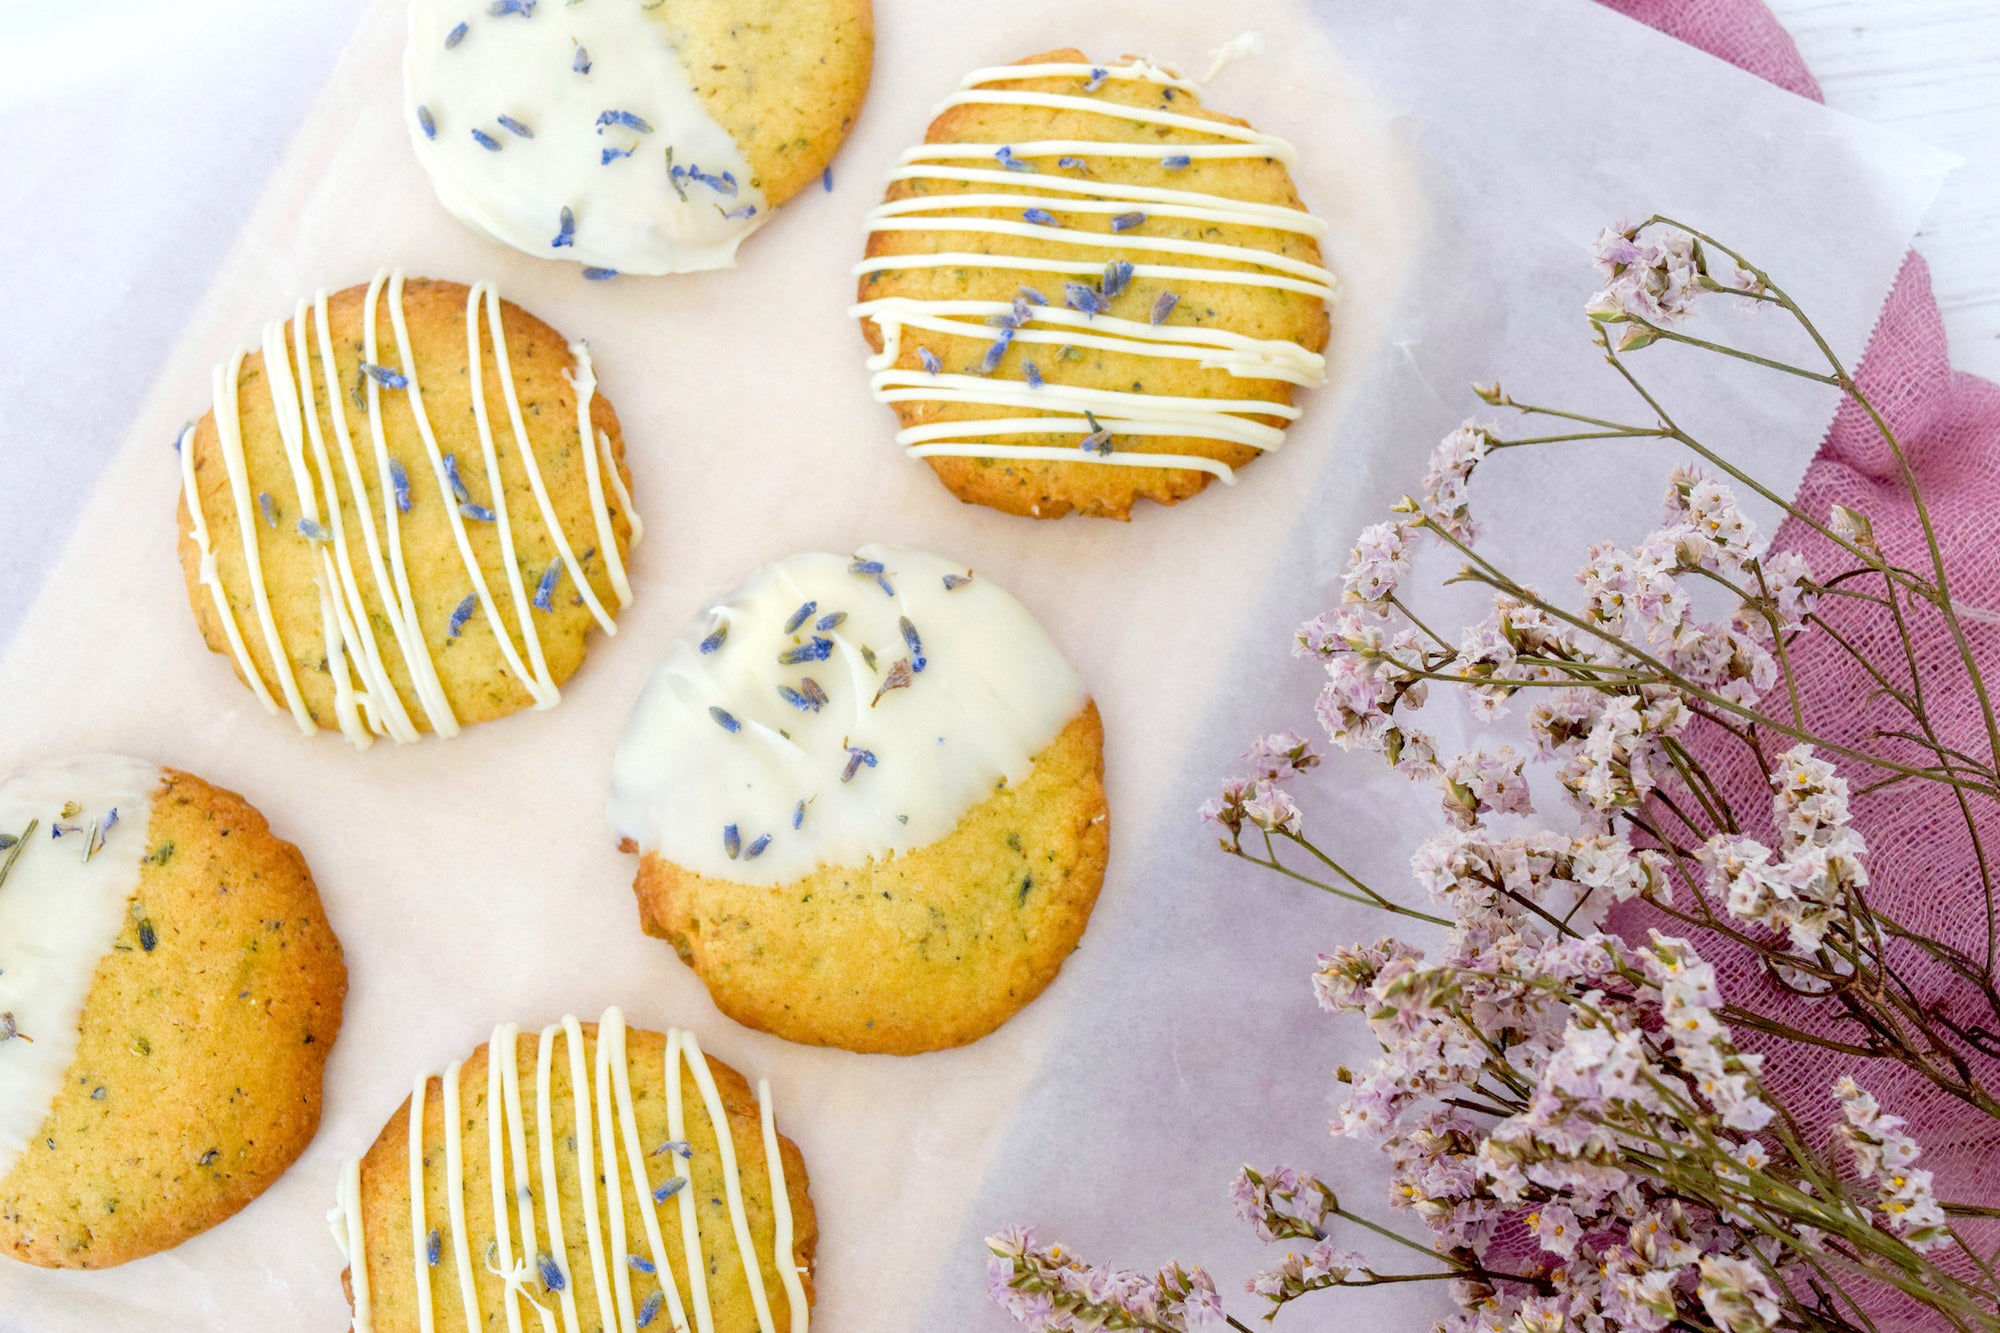 August's Kit: Lavender White Chocolate Cookies